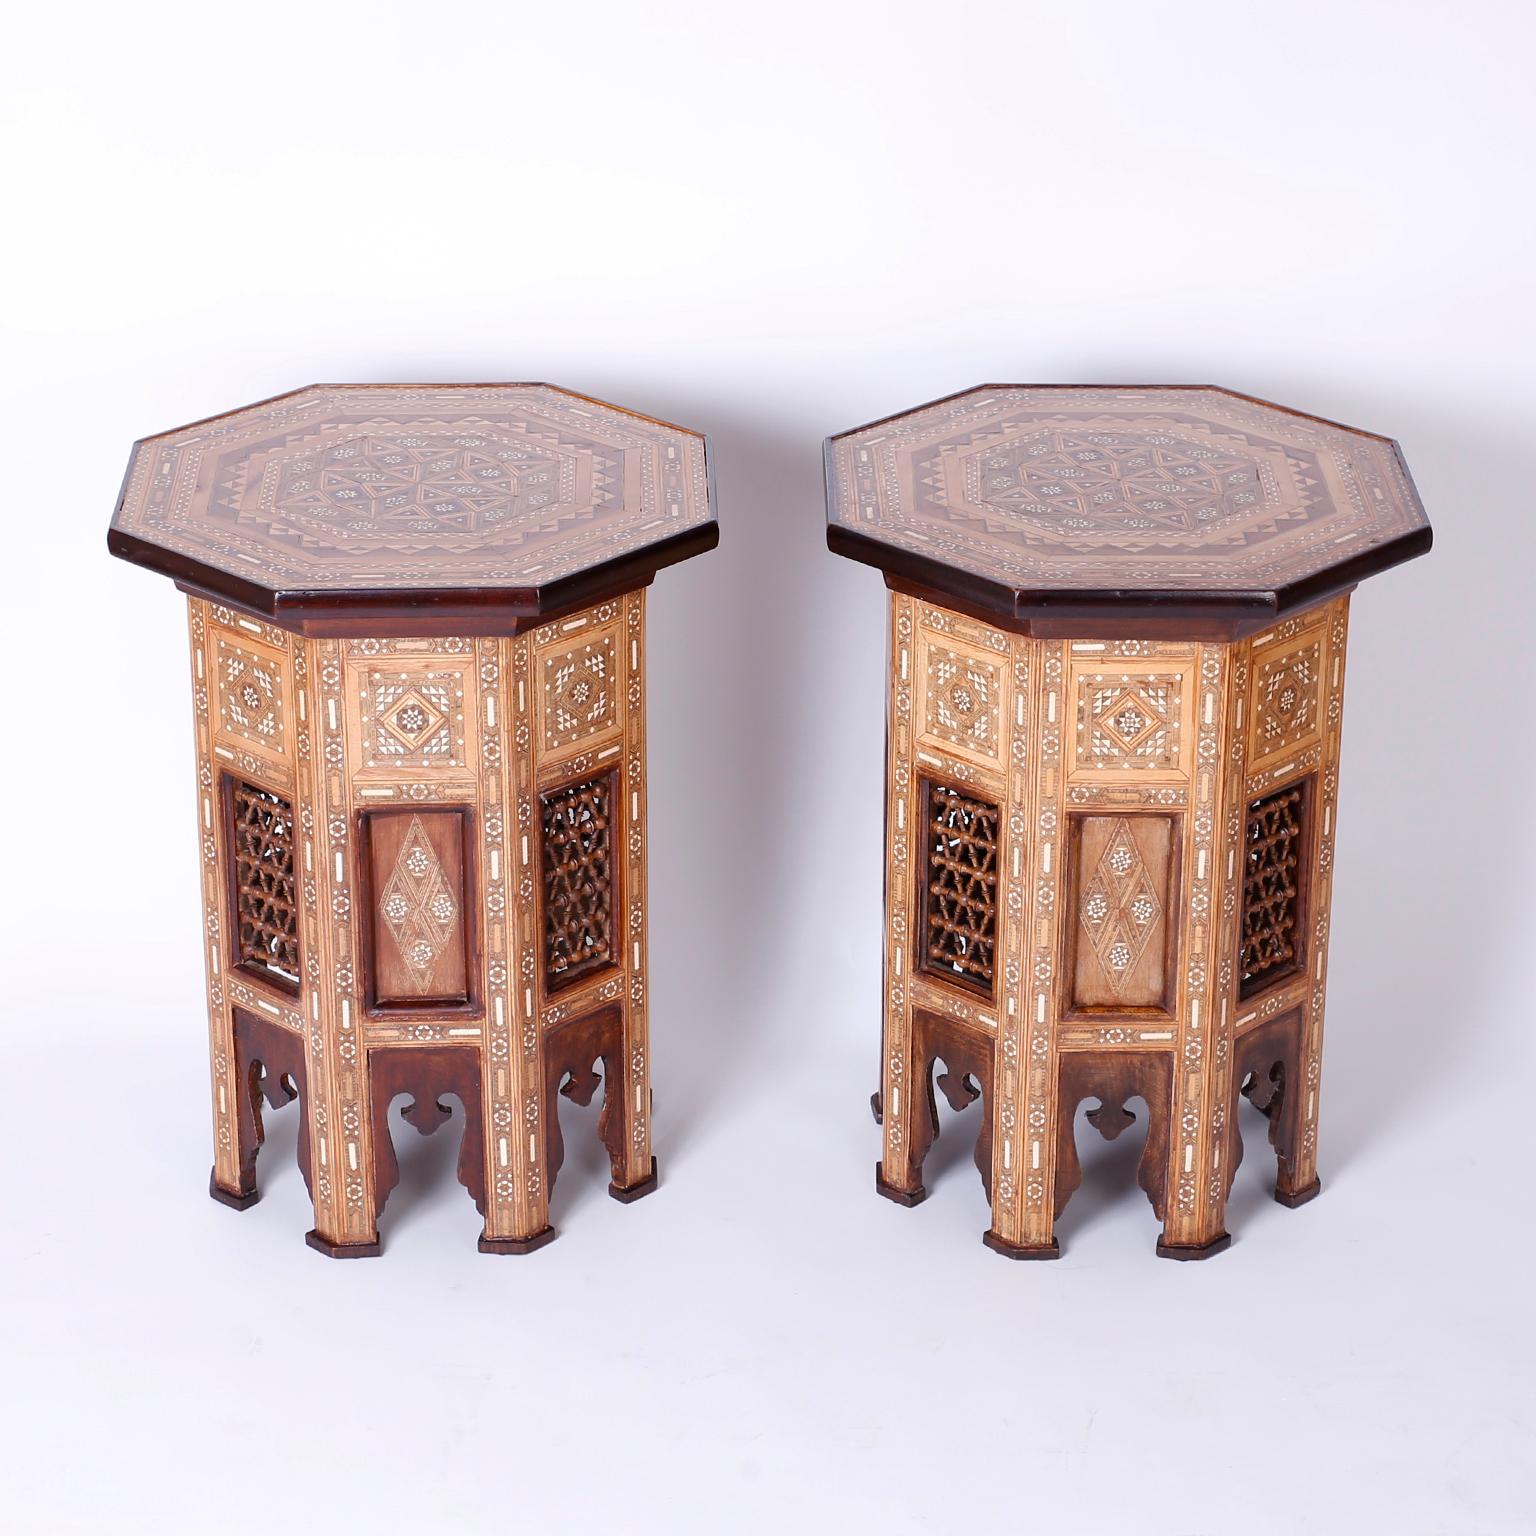 Exotic pair of antique Syrian stands with an octagon form and inlaid walnut, mahogany, king wood, and bone through out. The top has a remarkable geometric marquetry medallion over a base with stick and ball panels and moorish arched legs.